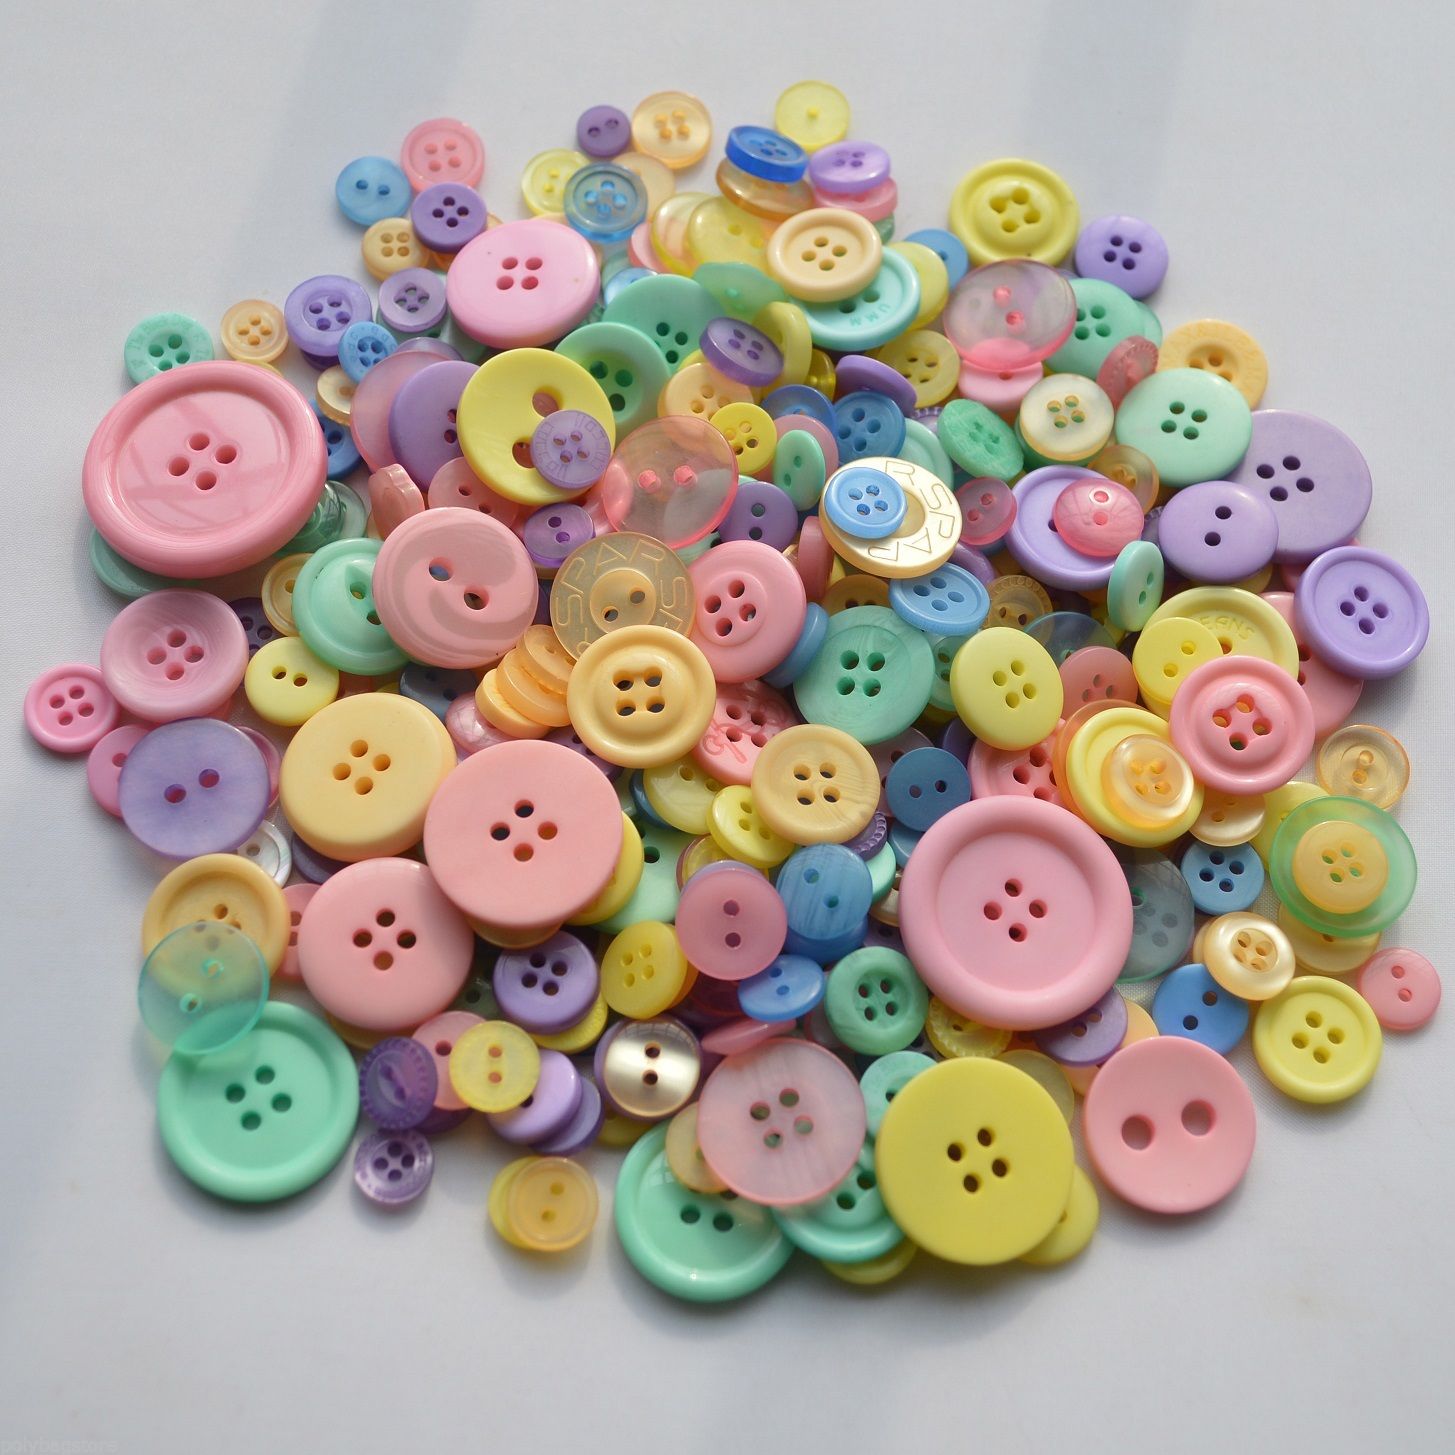 400 Buttons, Small Buttons Pastel Mix, Special Bundle Packs, Art Buttons,  Crafting, Jewelry, (SBP 2)